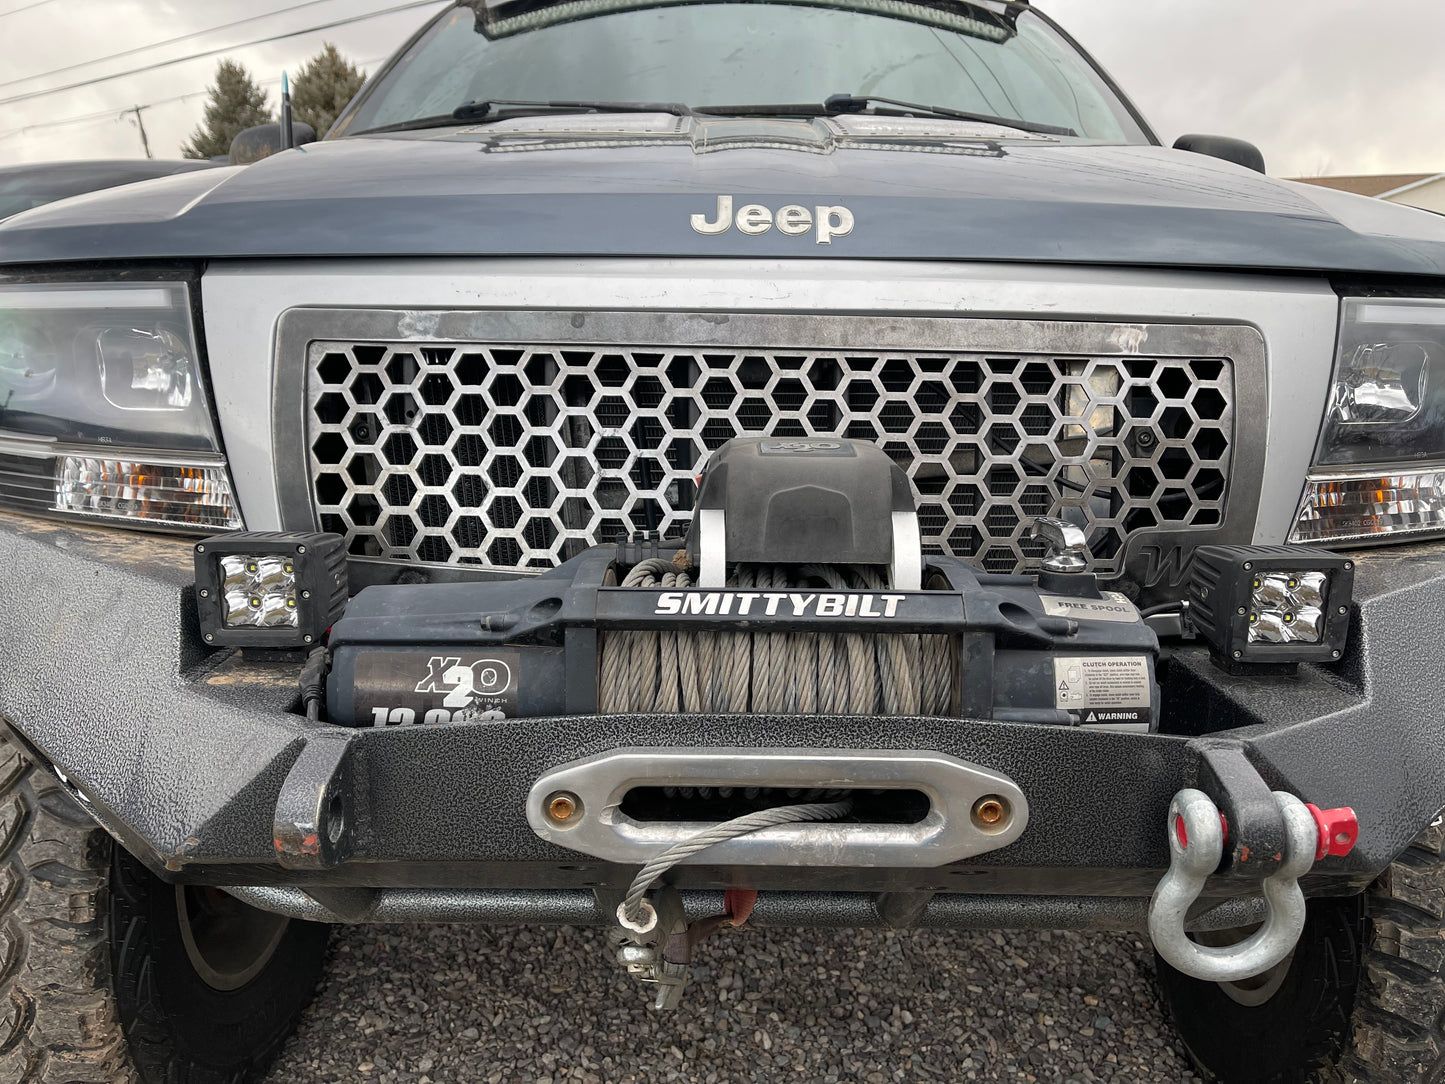 2004 Style Jeep WJ Grille Insert